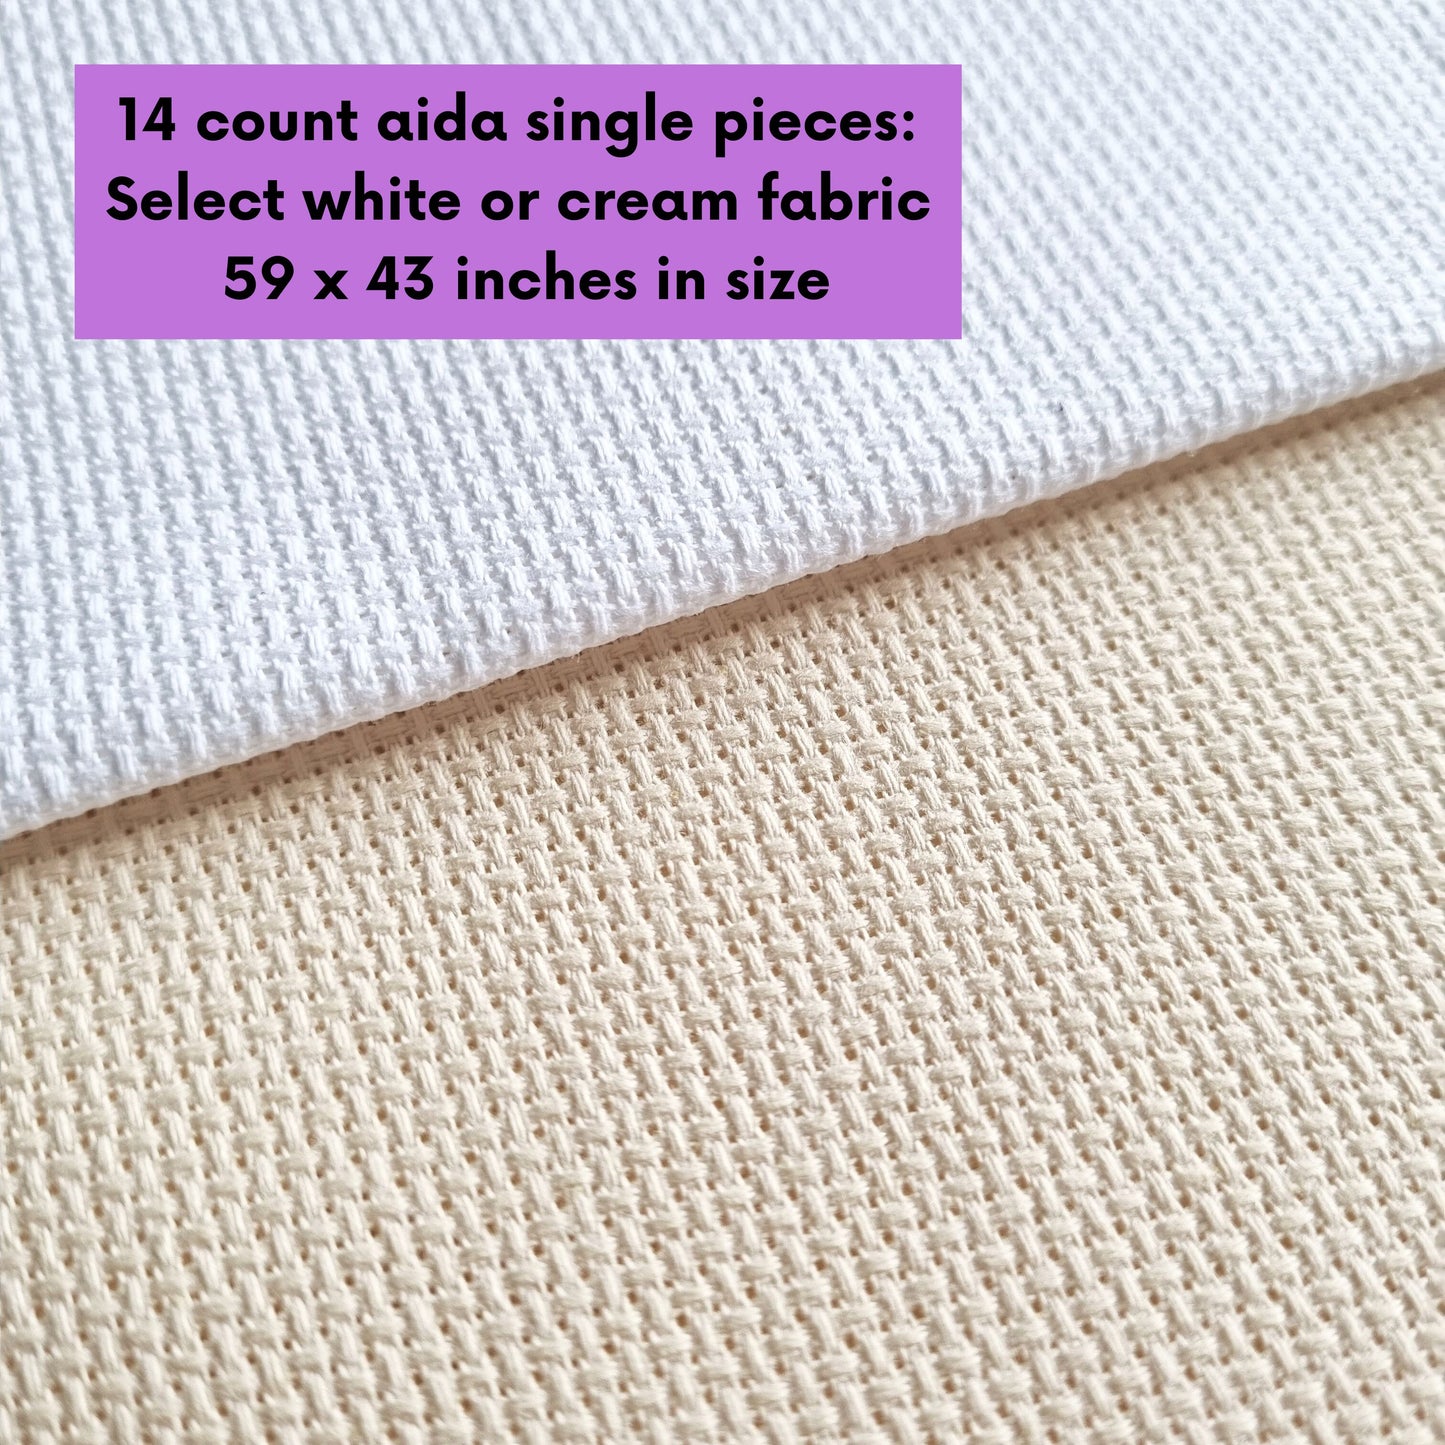 14 Count Aida Fabric 59 x 43 Inches in White or Cream